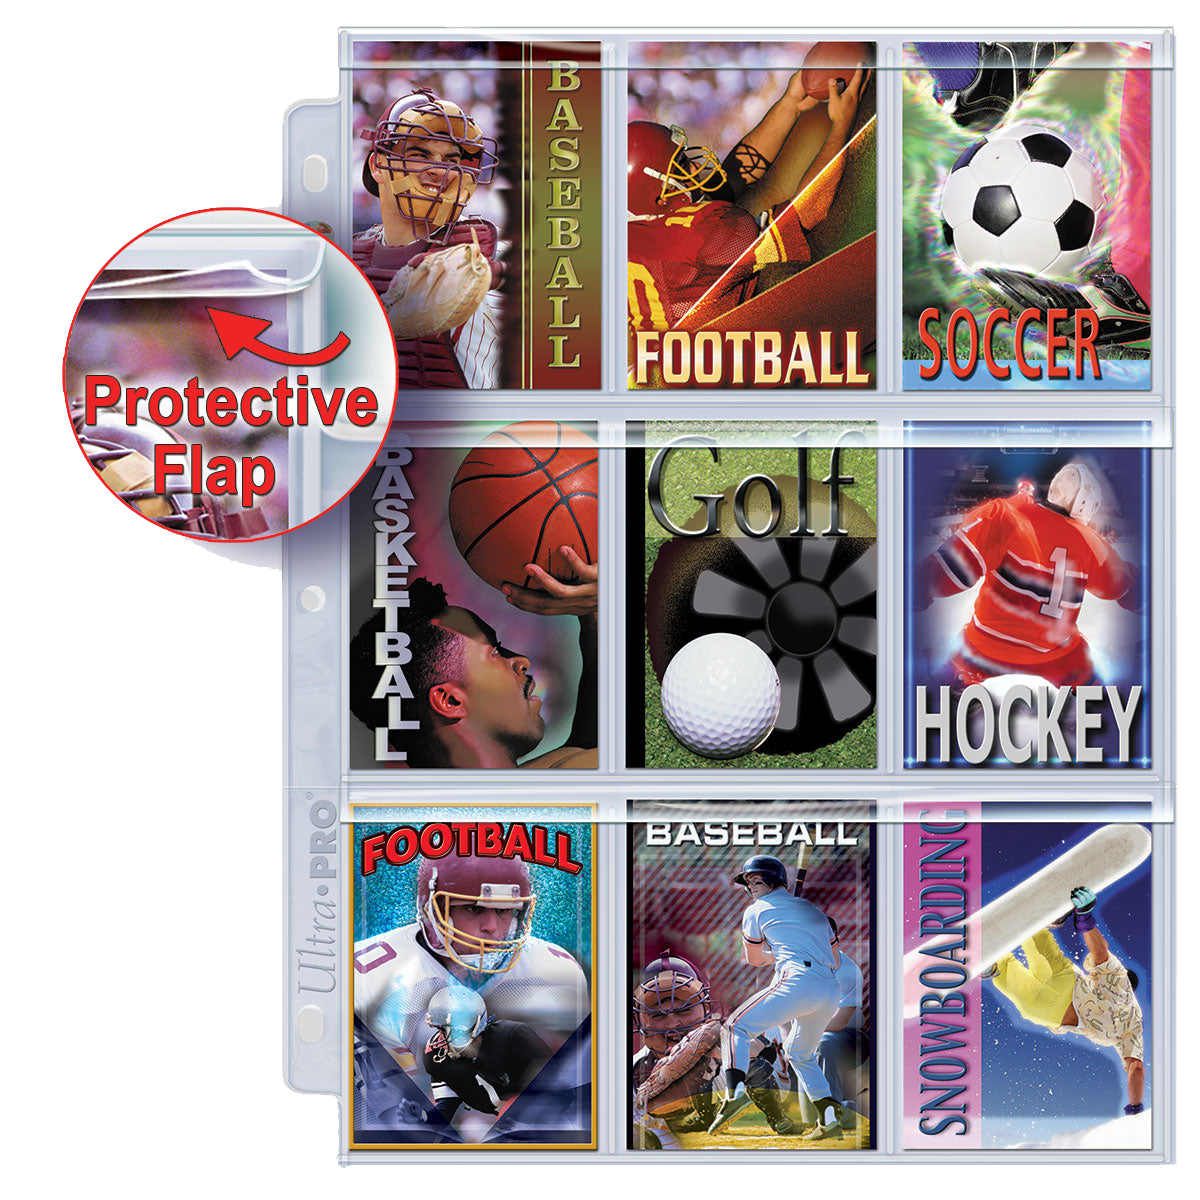 Ultra Pro 9 Pocket Pages Platinum Series 100 Pages of Card Sleeves